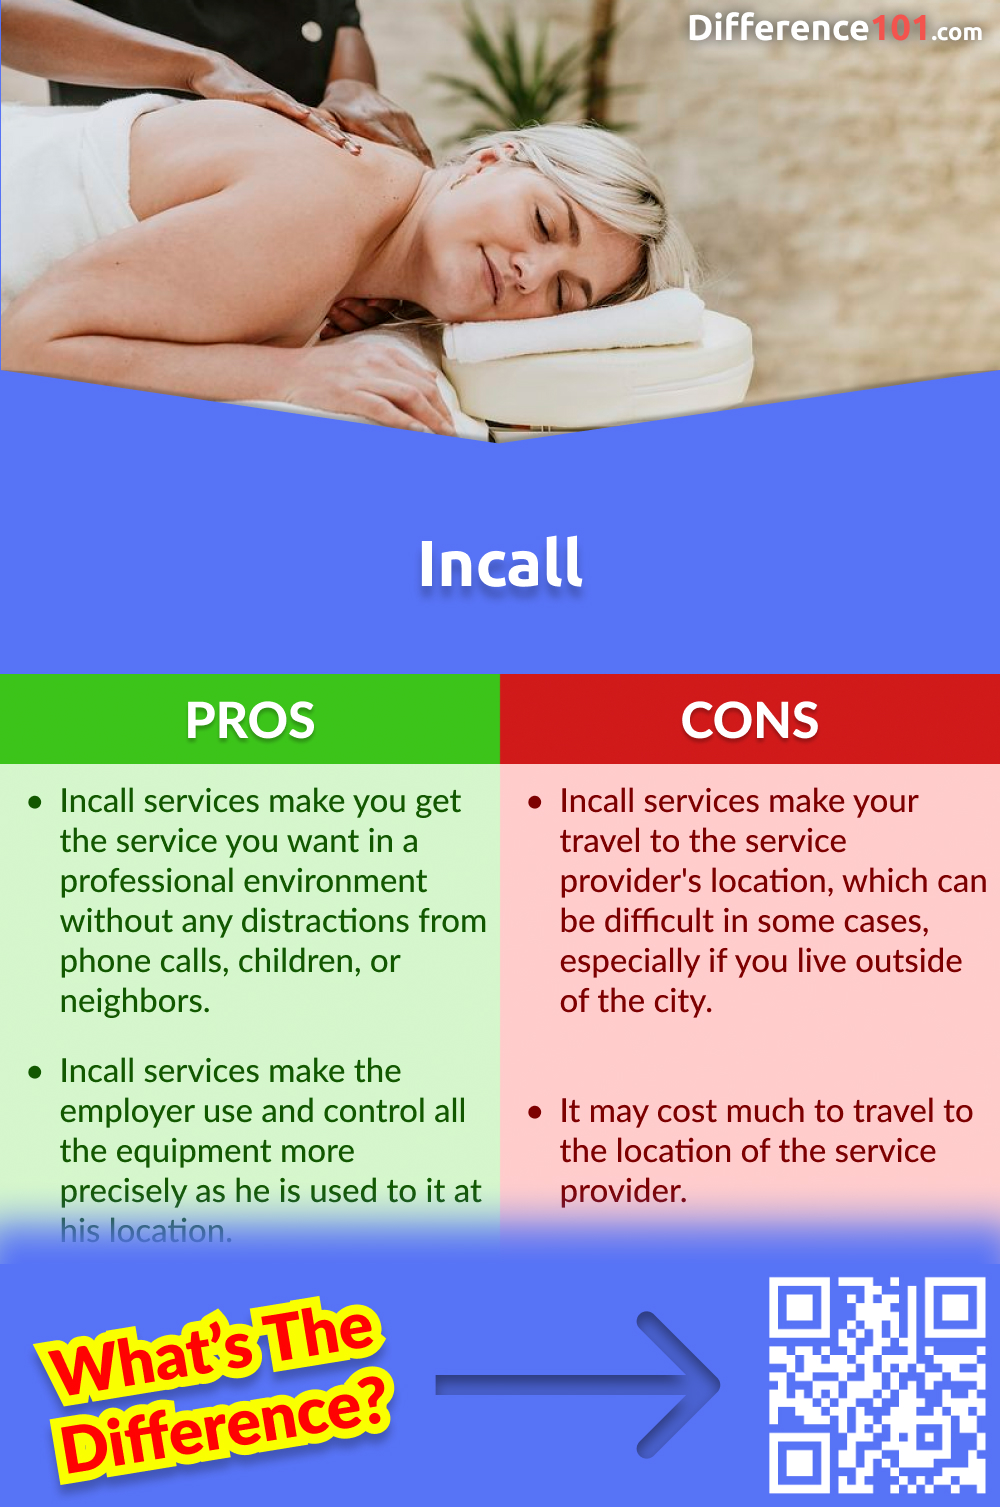 Incall Pros and Cons